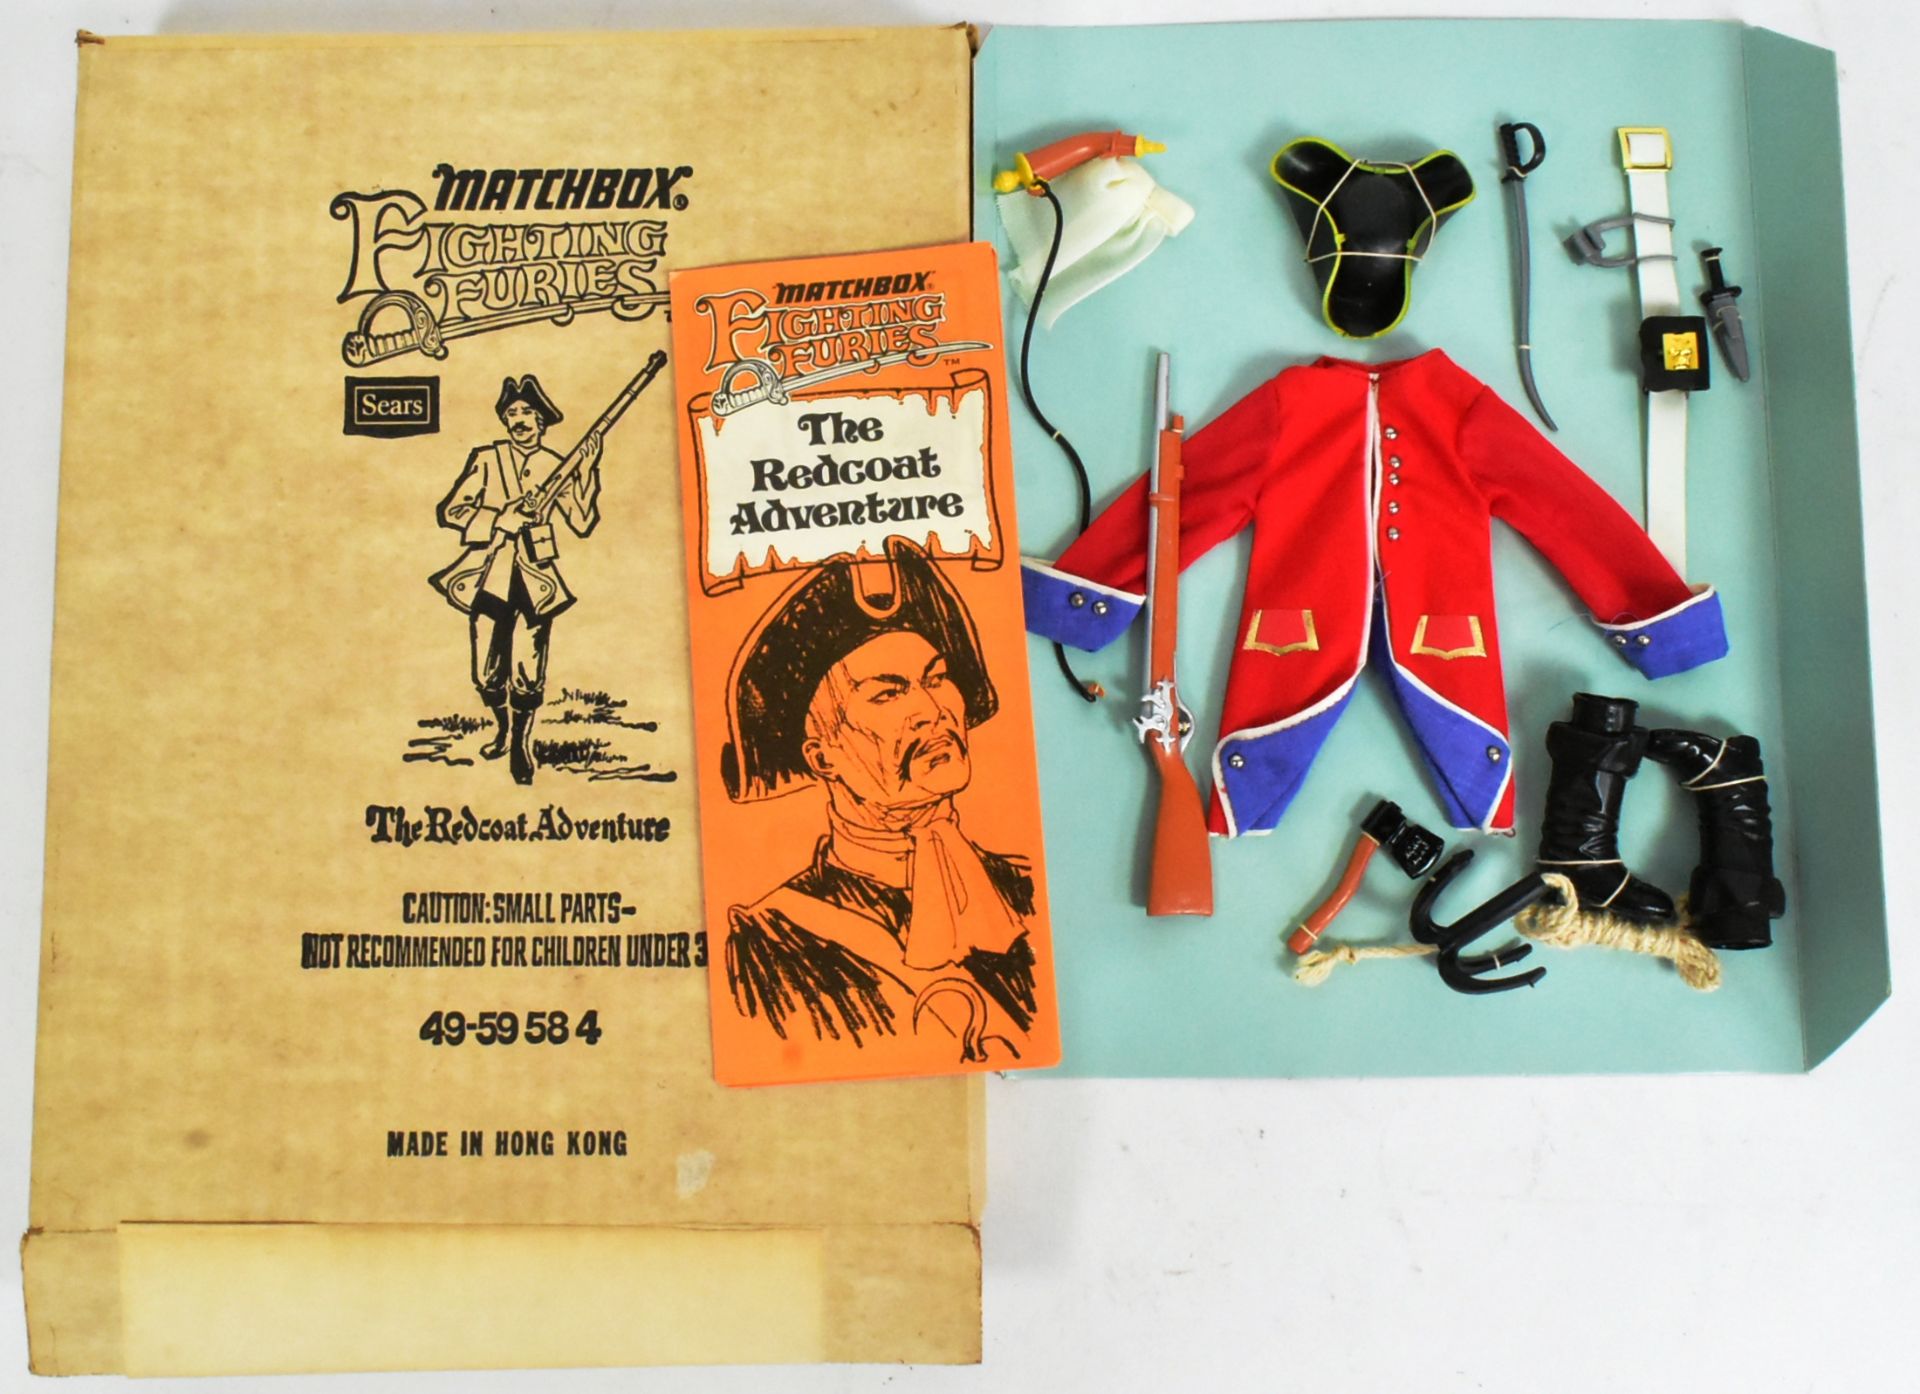 MATCHBOX - 1974 - FIGHTING FURIES - COSTUME PACKS - Image 2 of 4